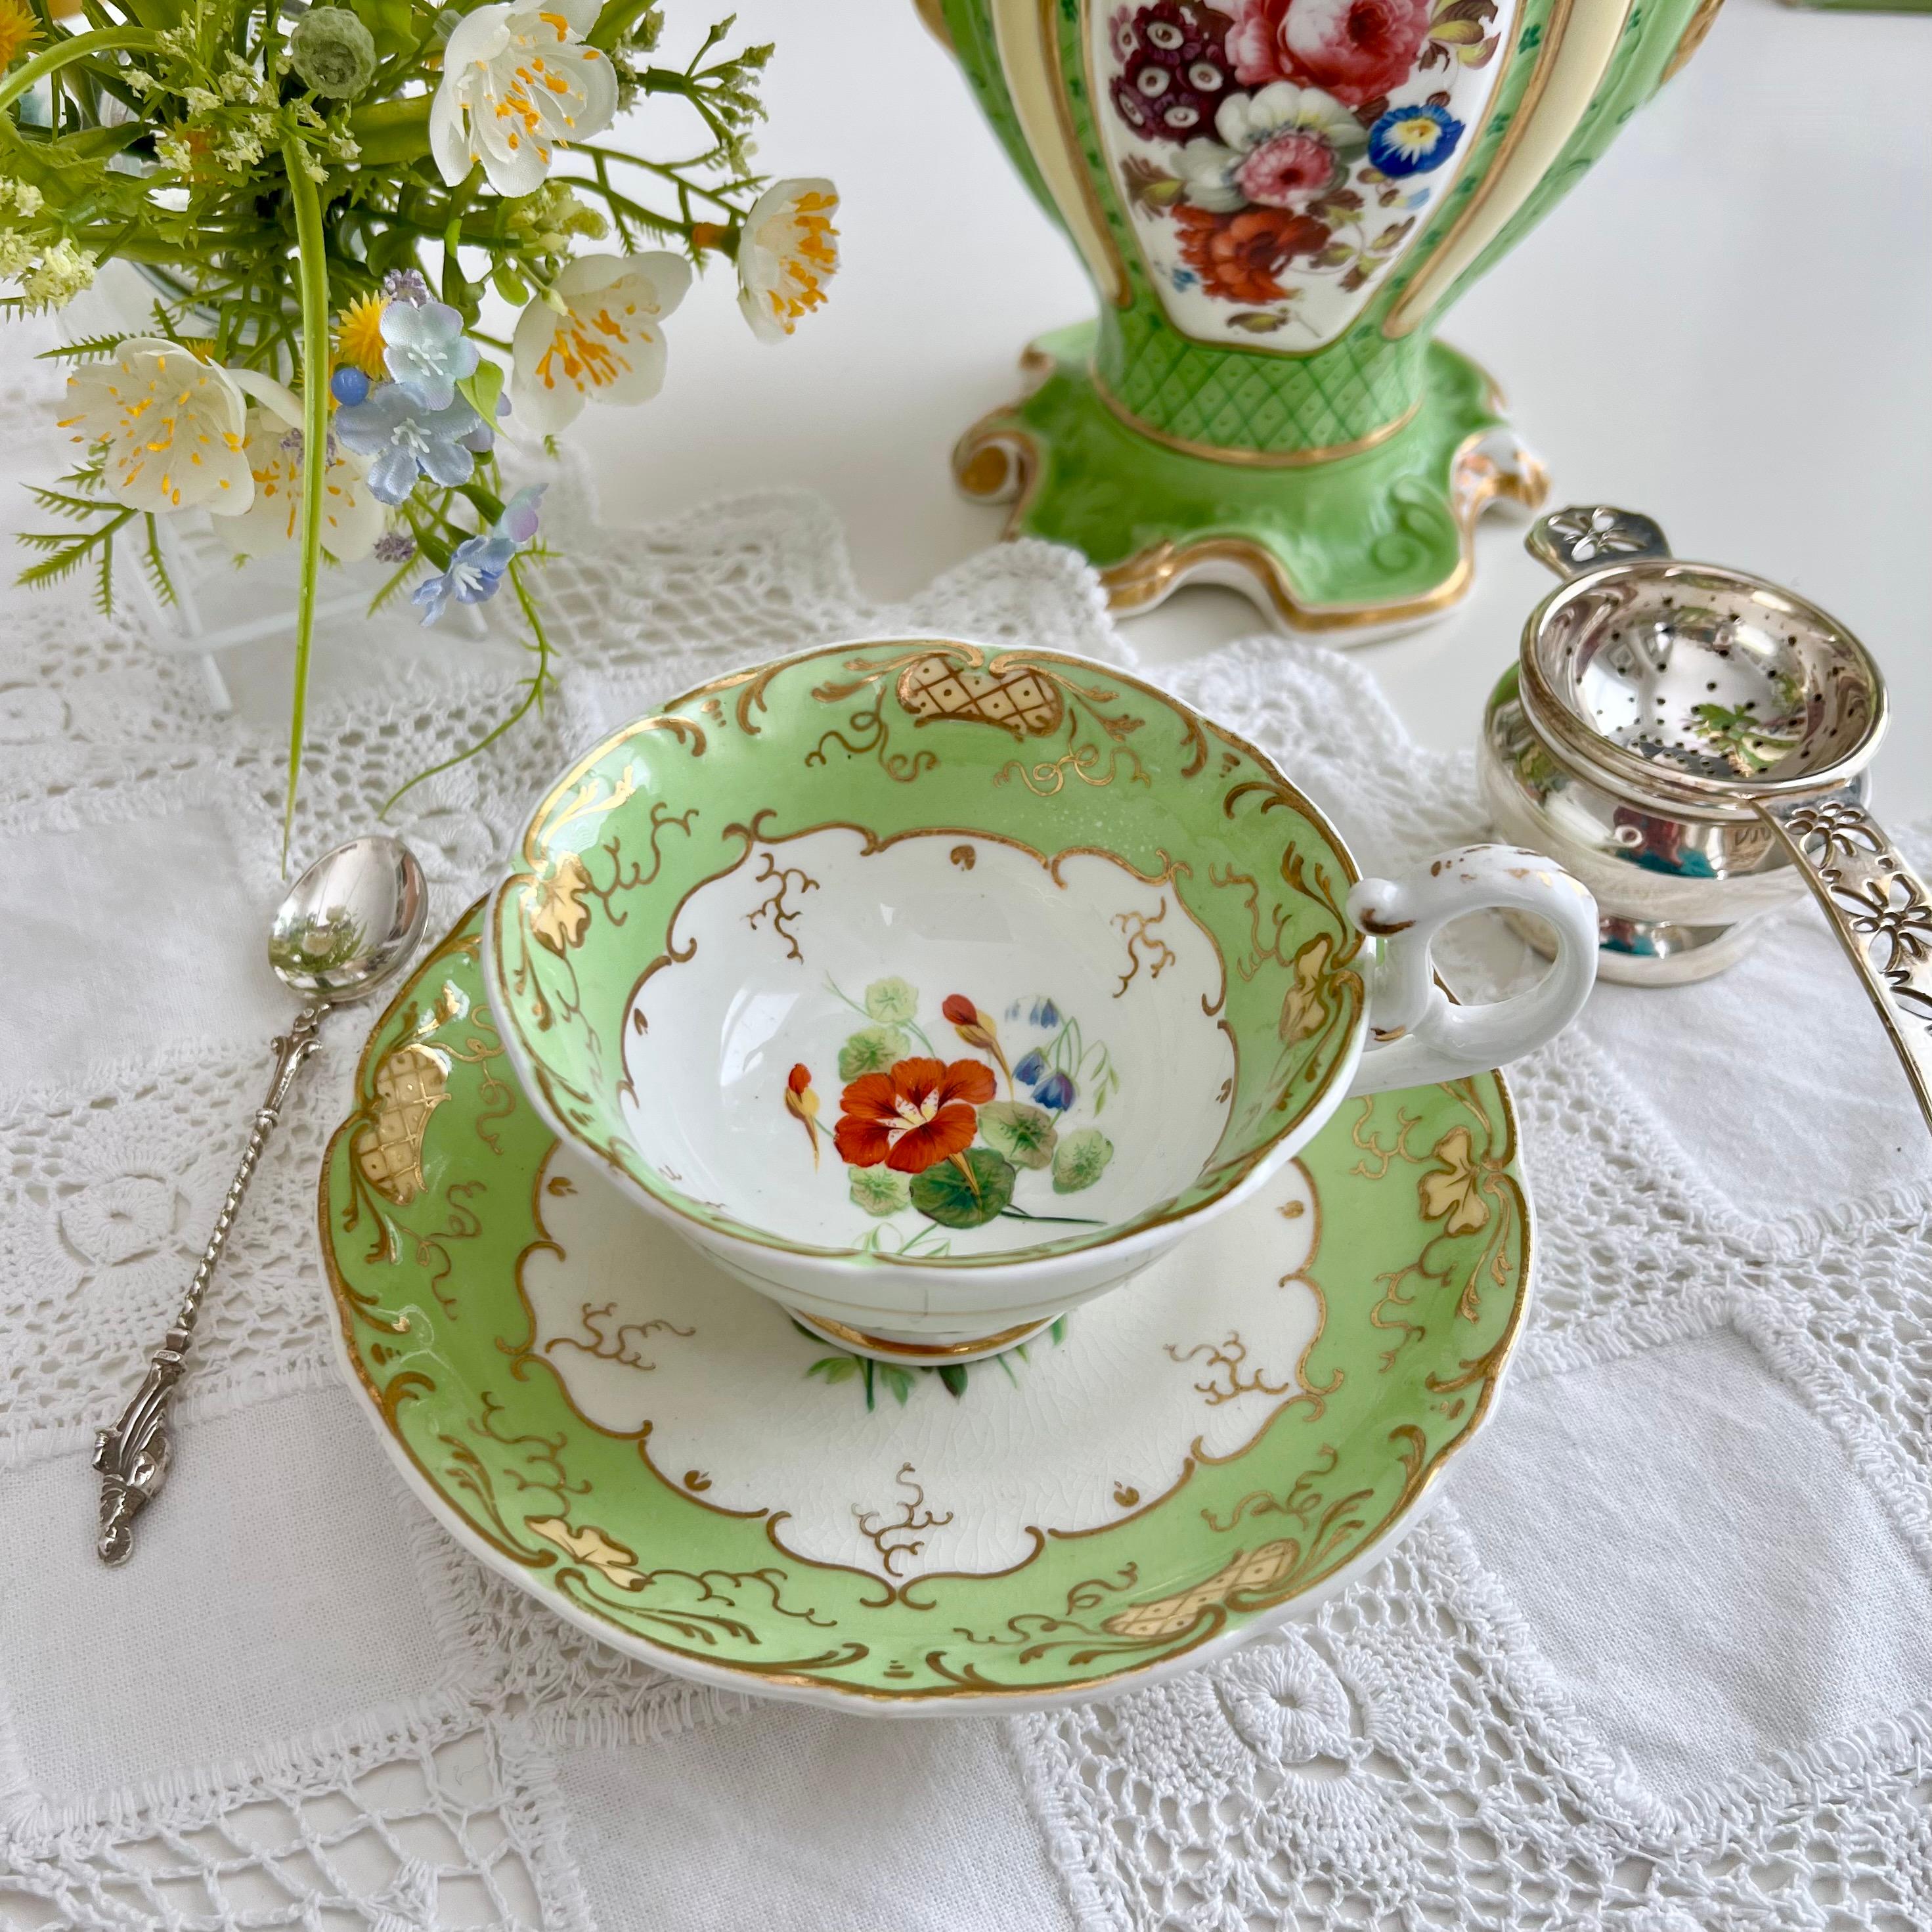 This is a rare and beautiful teacup and saucer made by H&R Daniel in about 1840. The set is potted in the 